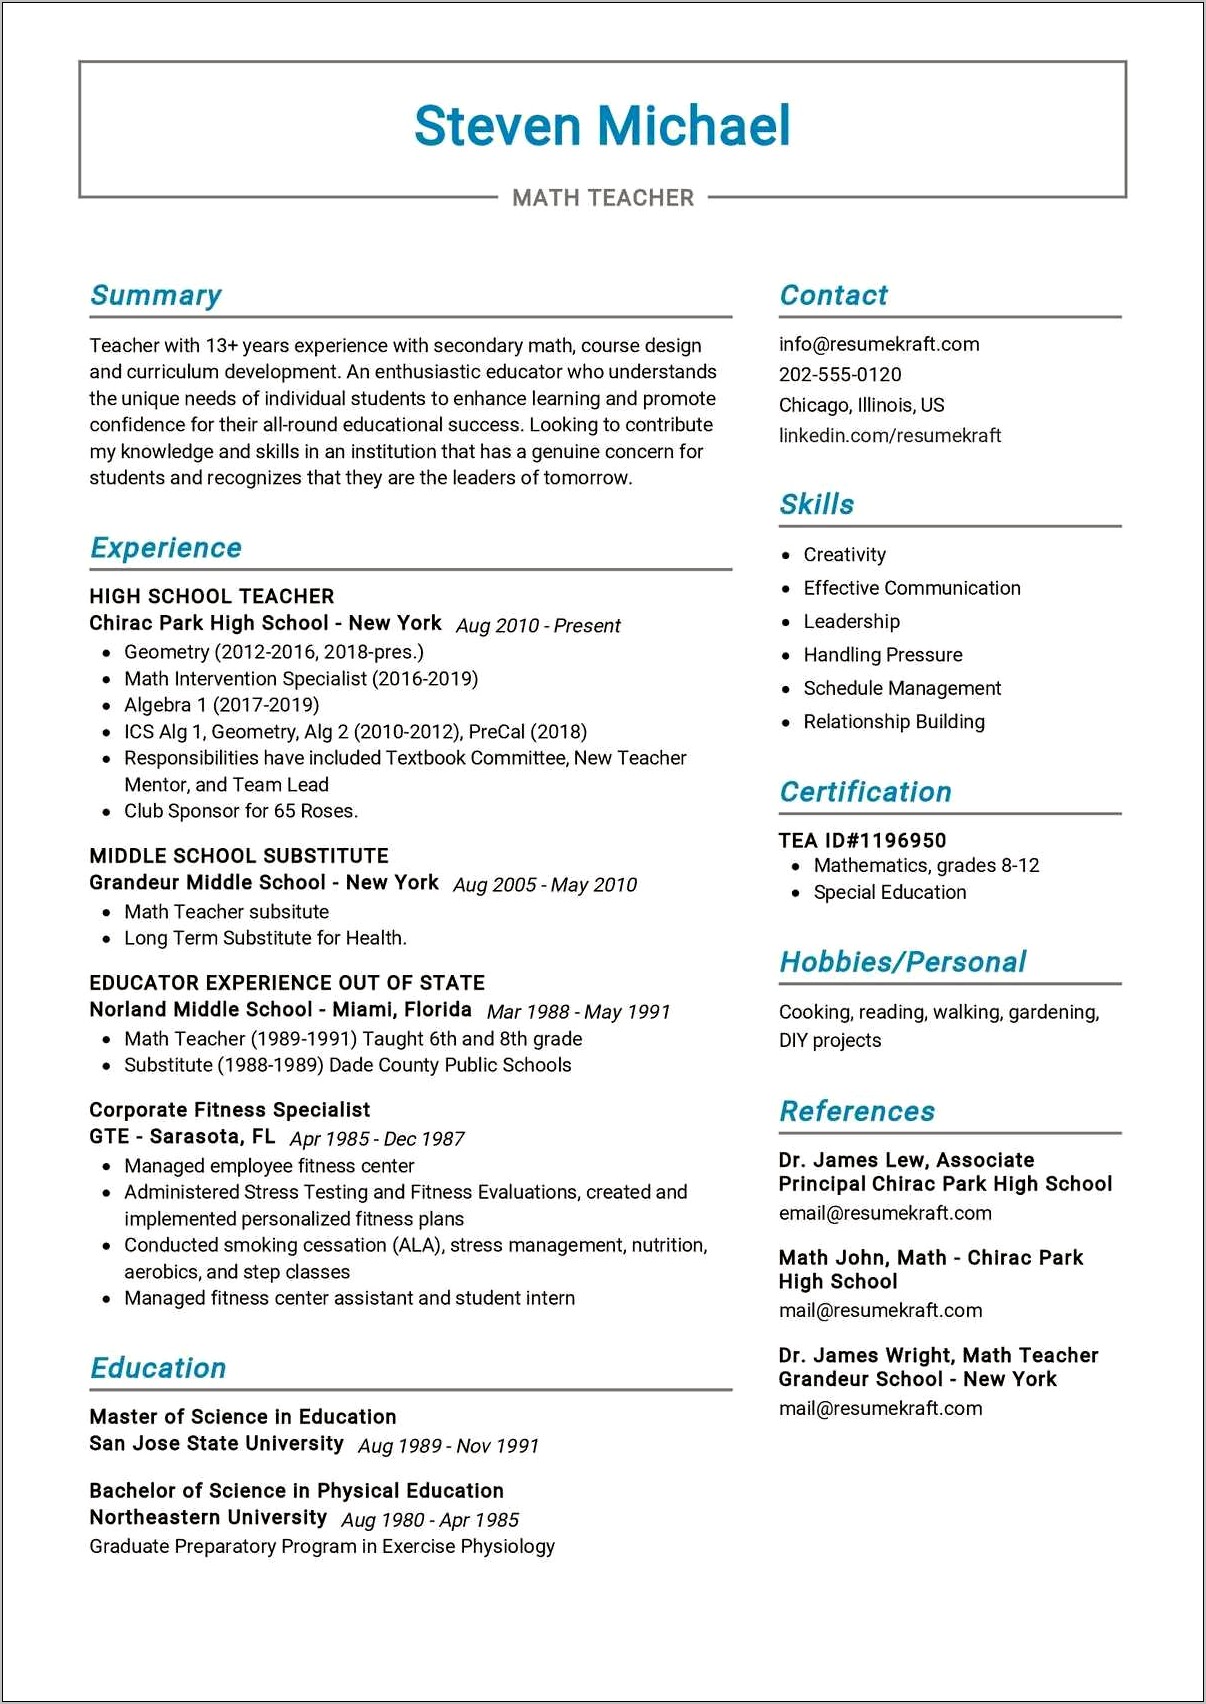 Resume Lesson Plan For Middle School Kids